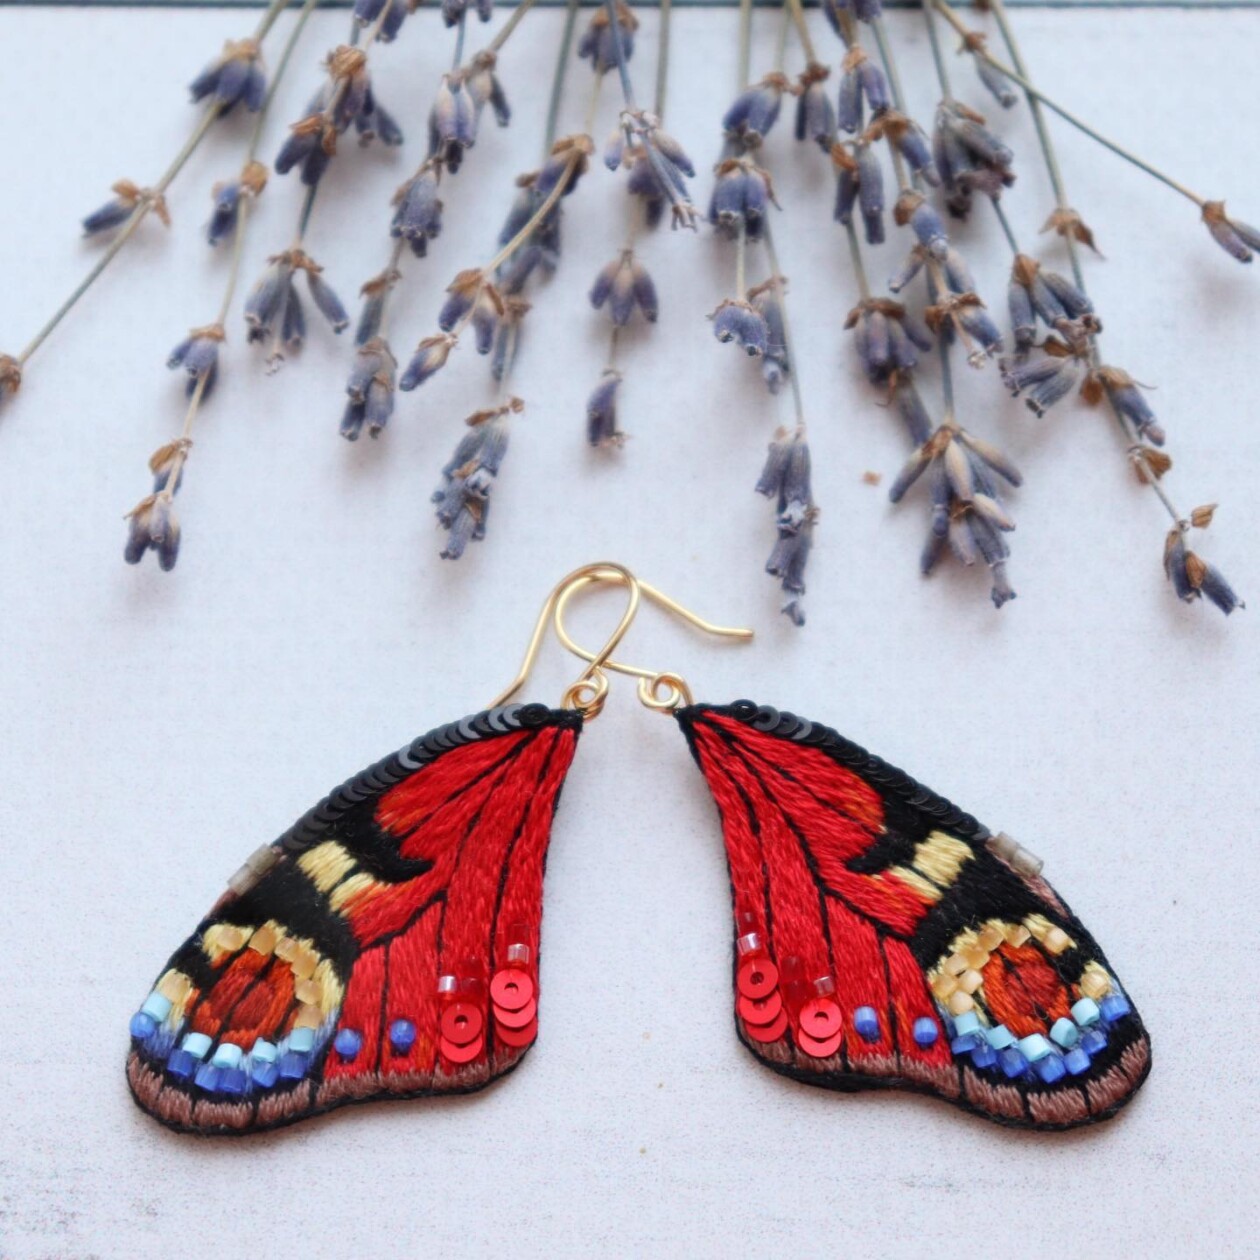 Eye Catching Handmade Embroidered Earrings By Vivaembr (11)